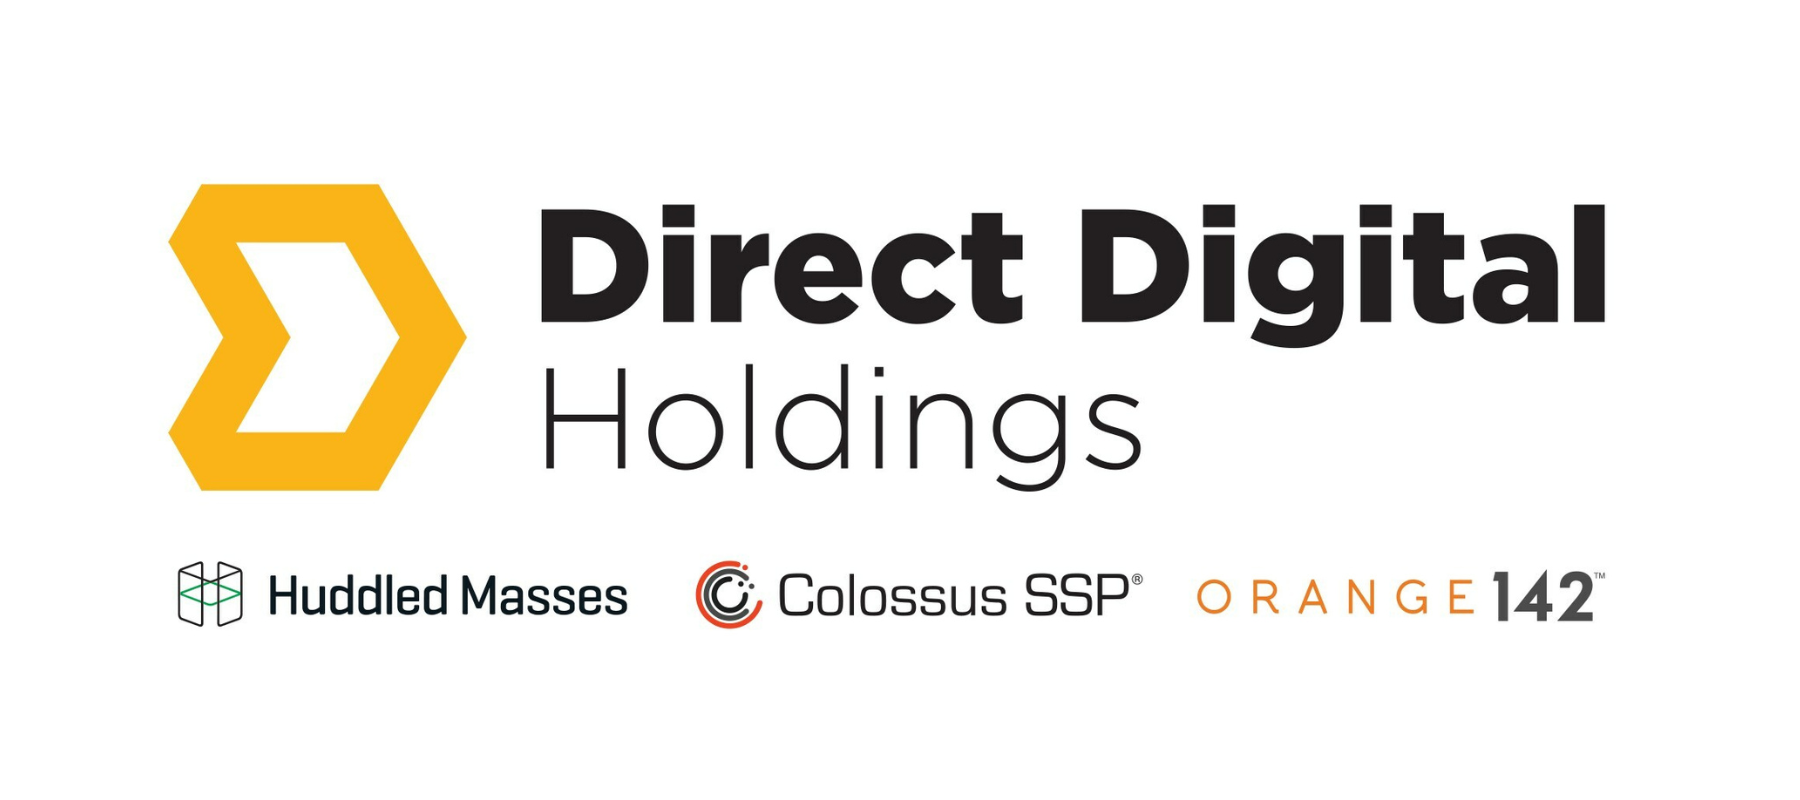 Direct Digital Holdings partners with Basis Technologies on buy-and sell-side